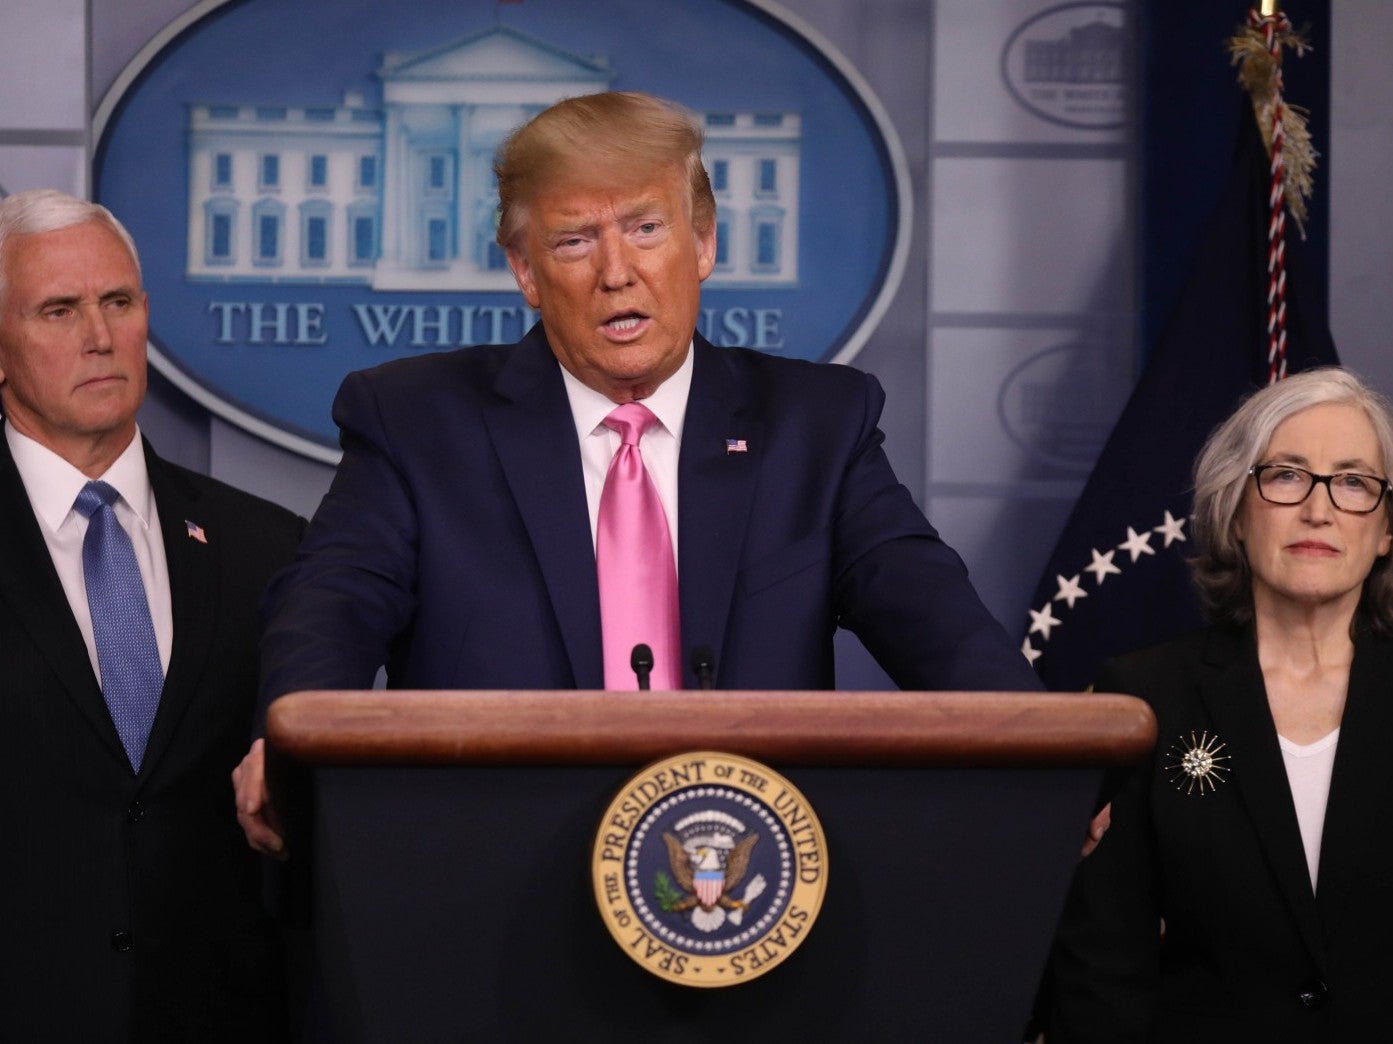 Donald Trump holds a press conference announcing Mike Pence to lead the effort combating the spread of the coronavirus, in Washington DC on 26 February 2020